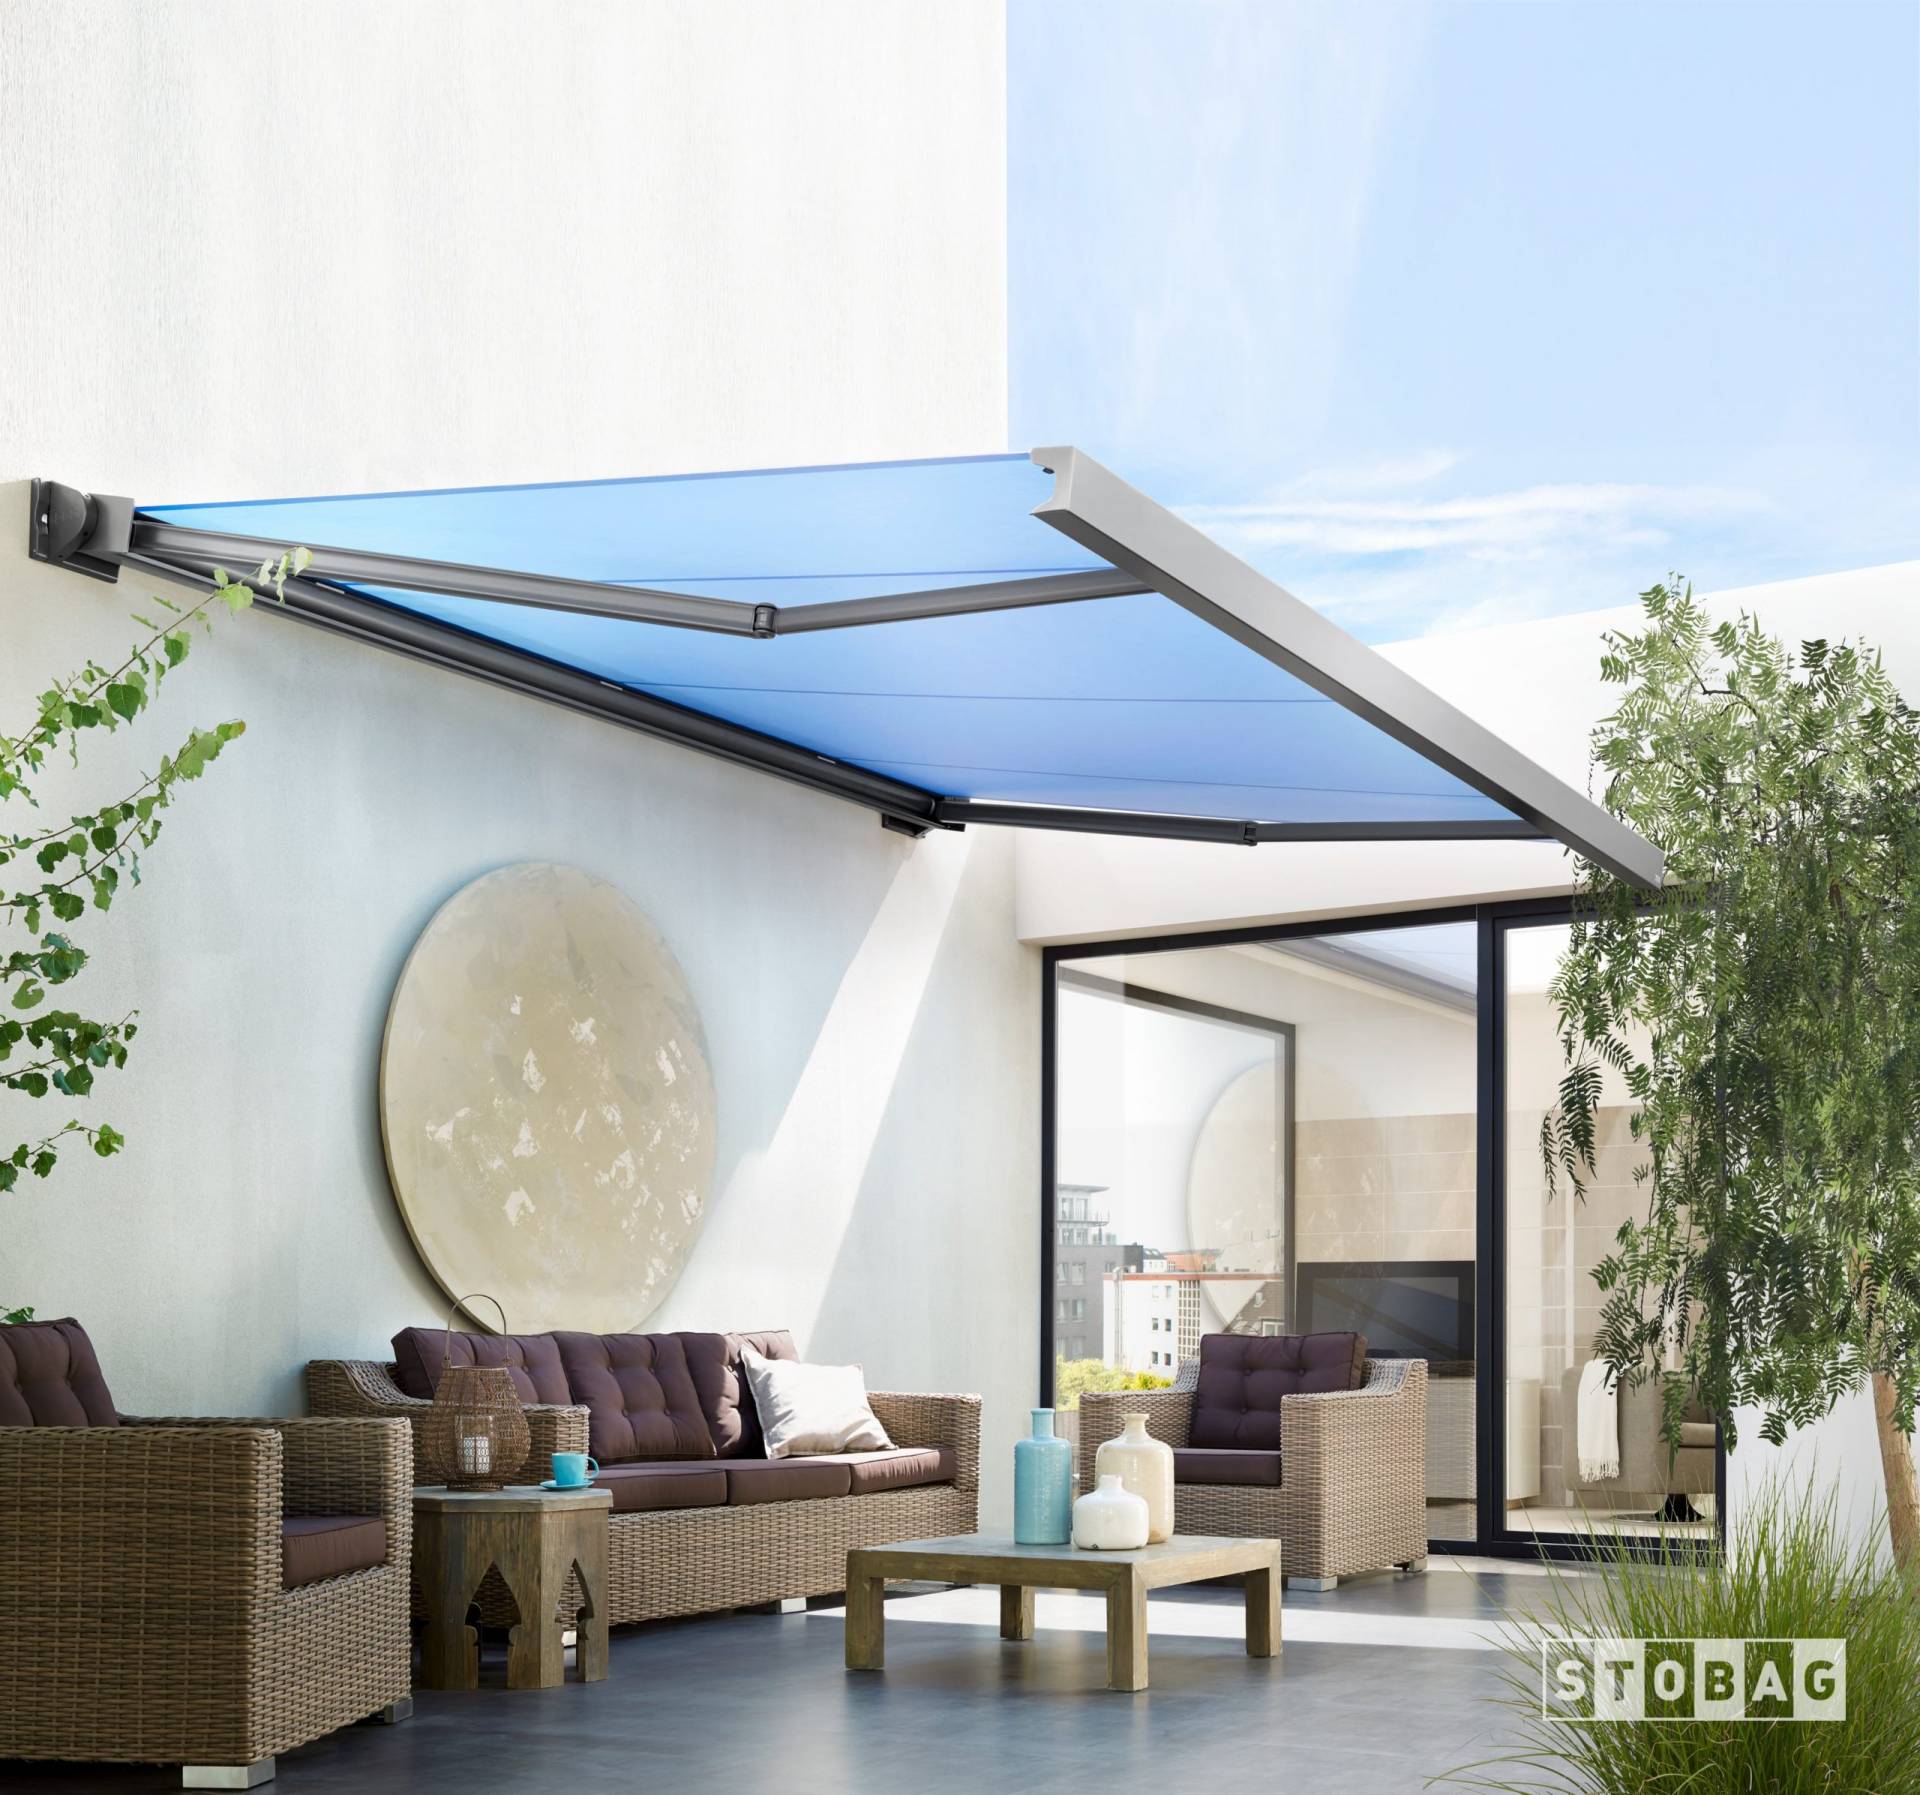 Clean square motorized awning